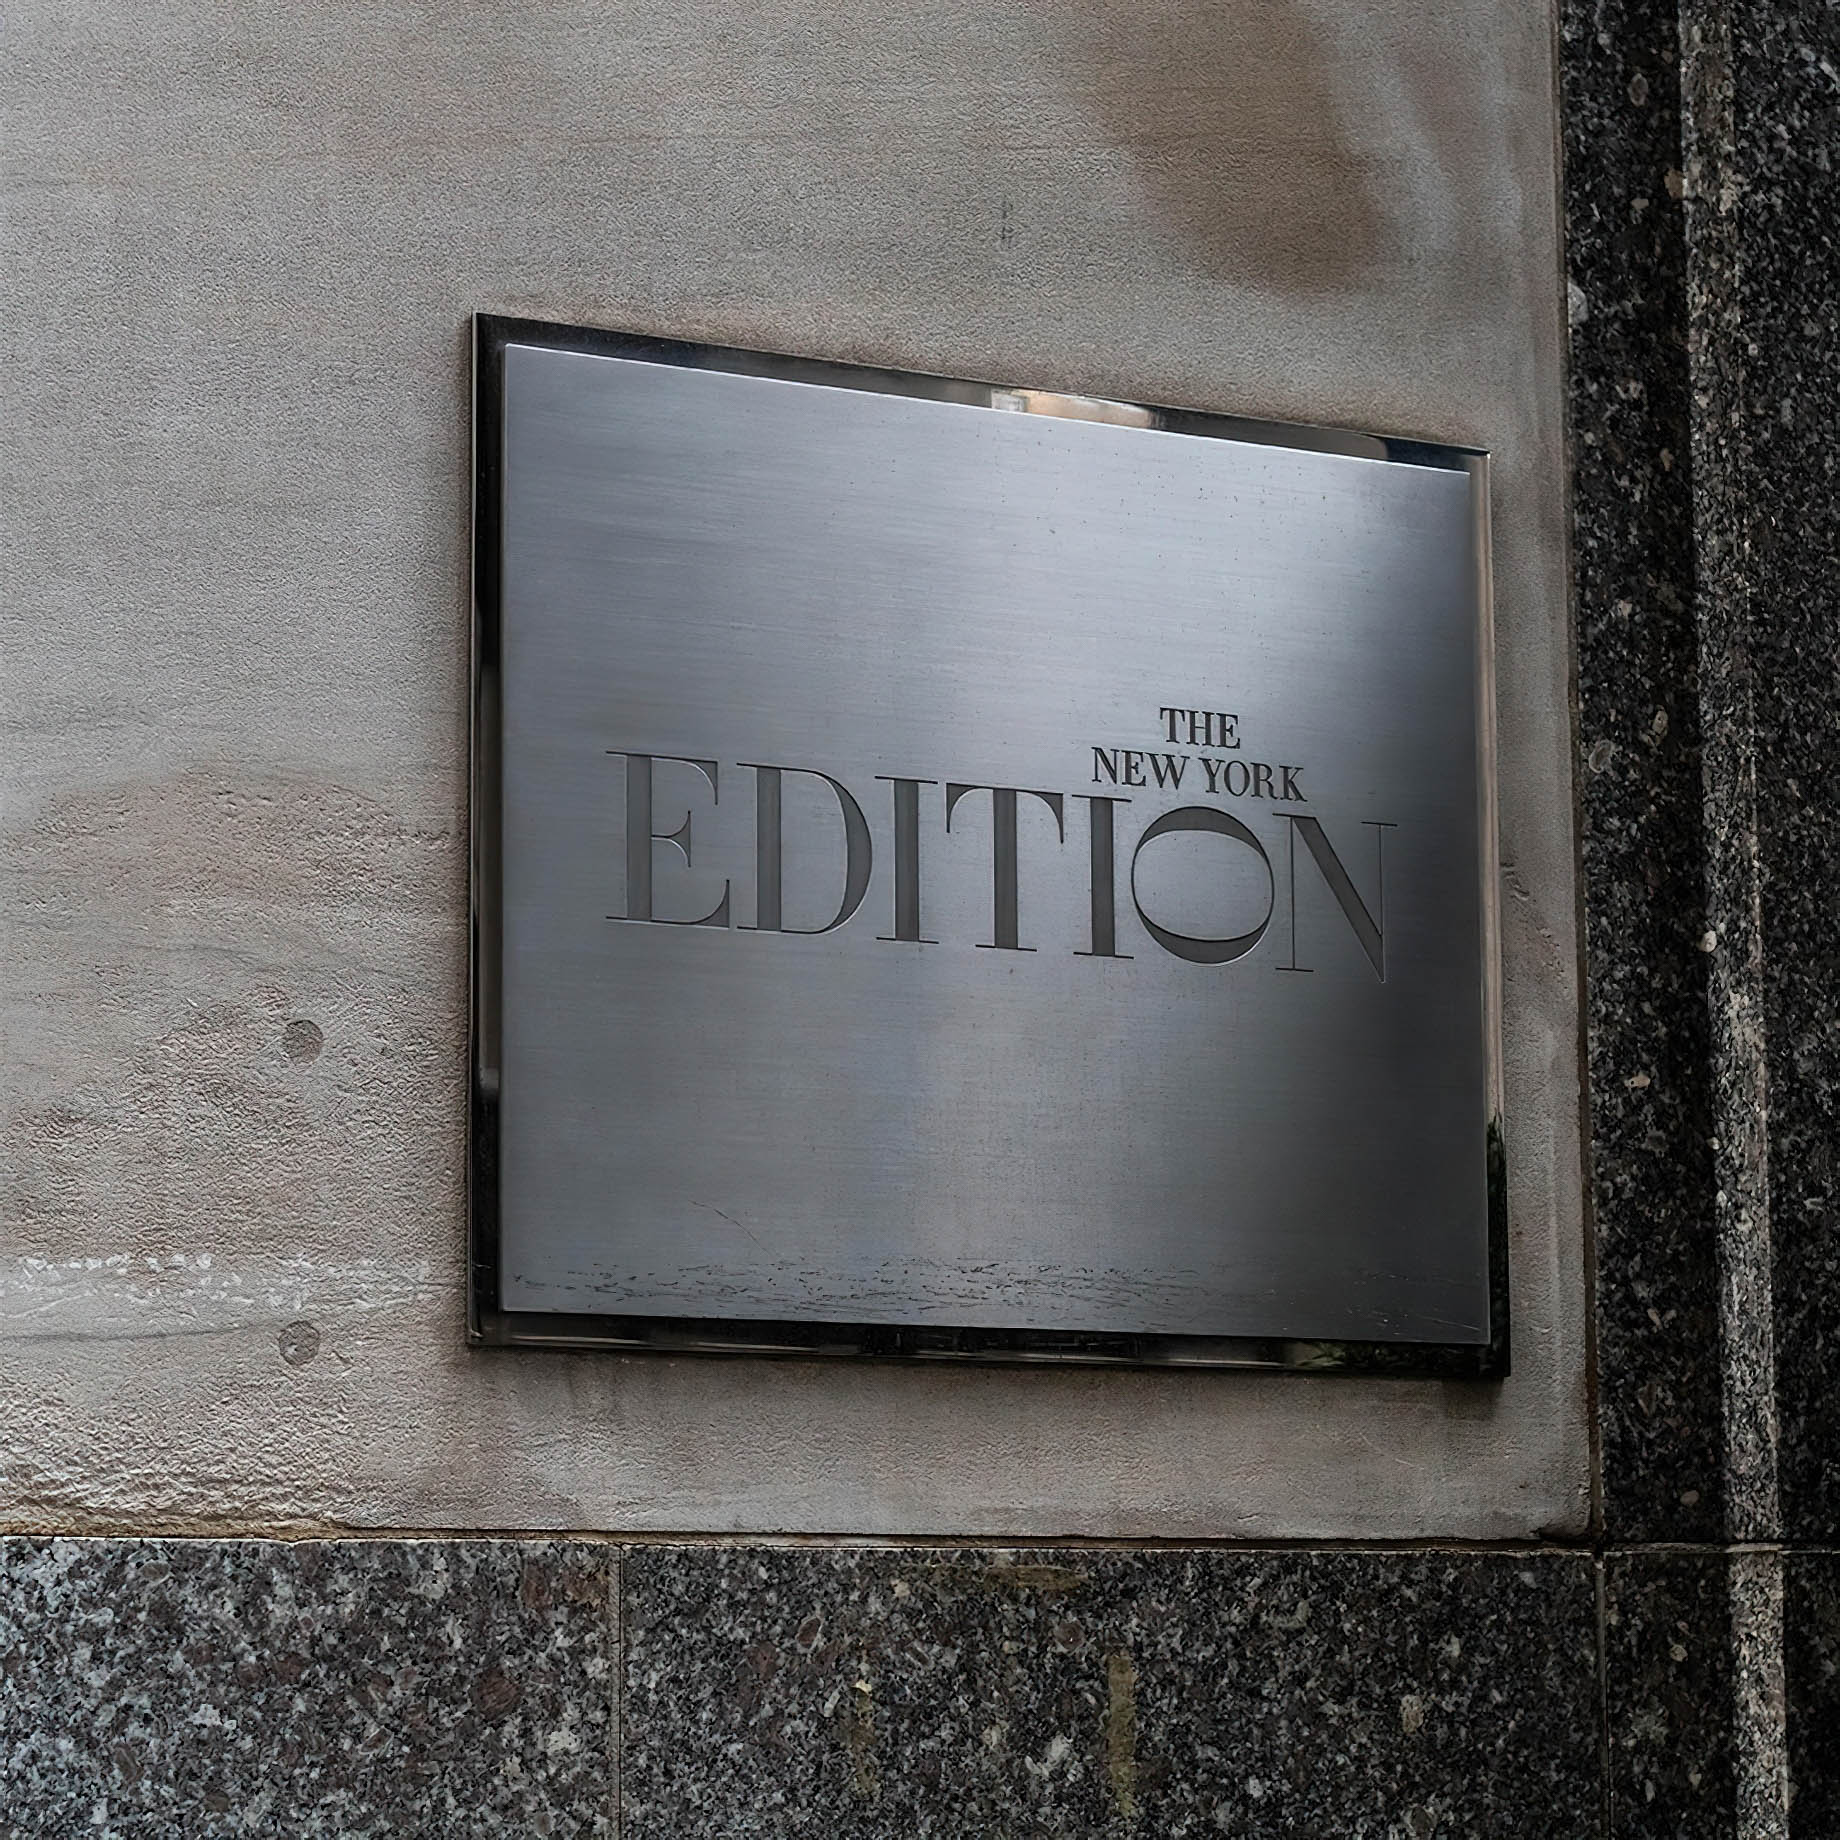 The New York EDITION Hotel - New York, NY, USA - The New York EDITION Sign